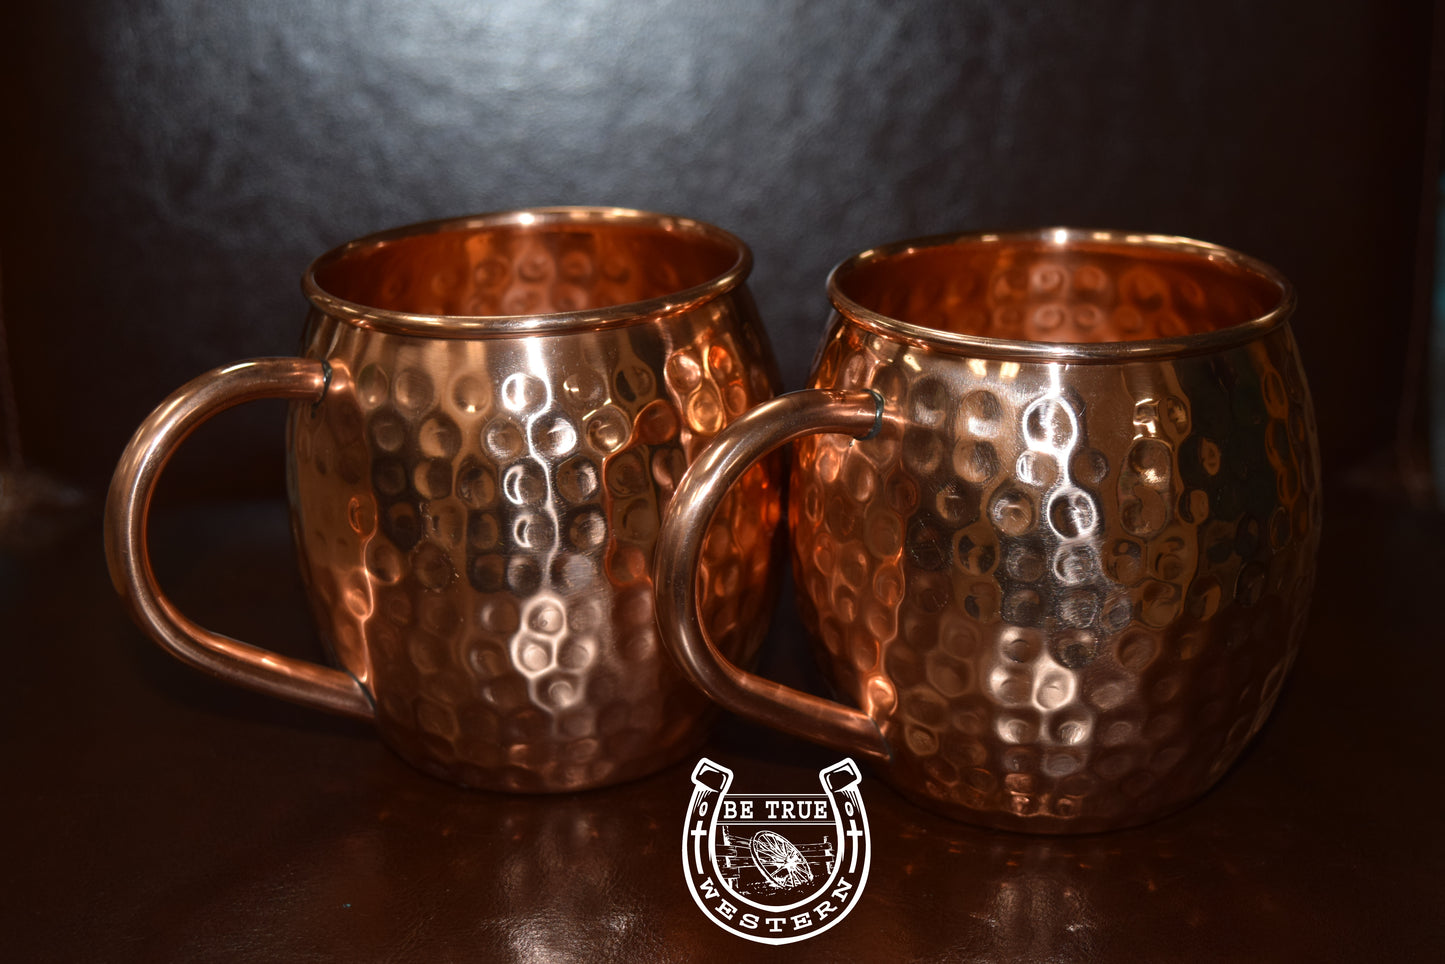 The Moscow Mule Copper Mug